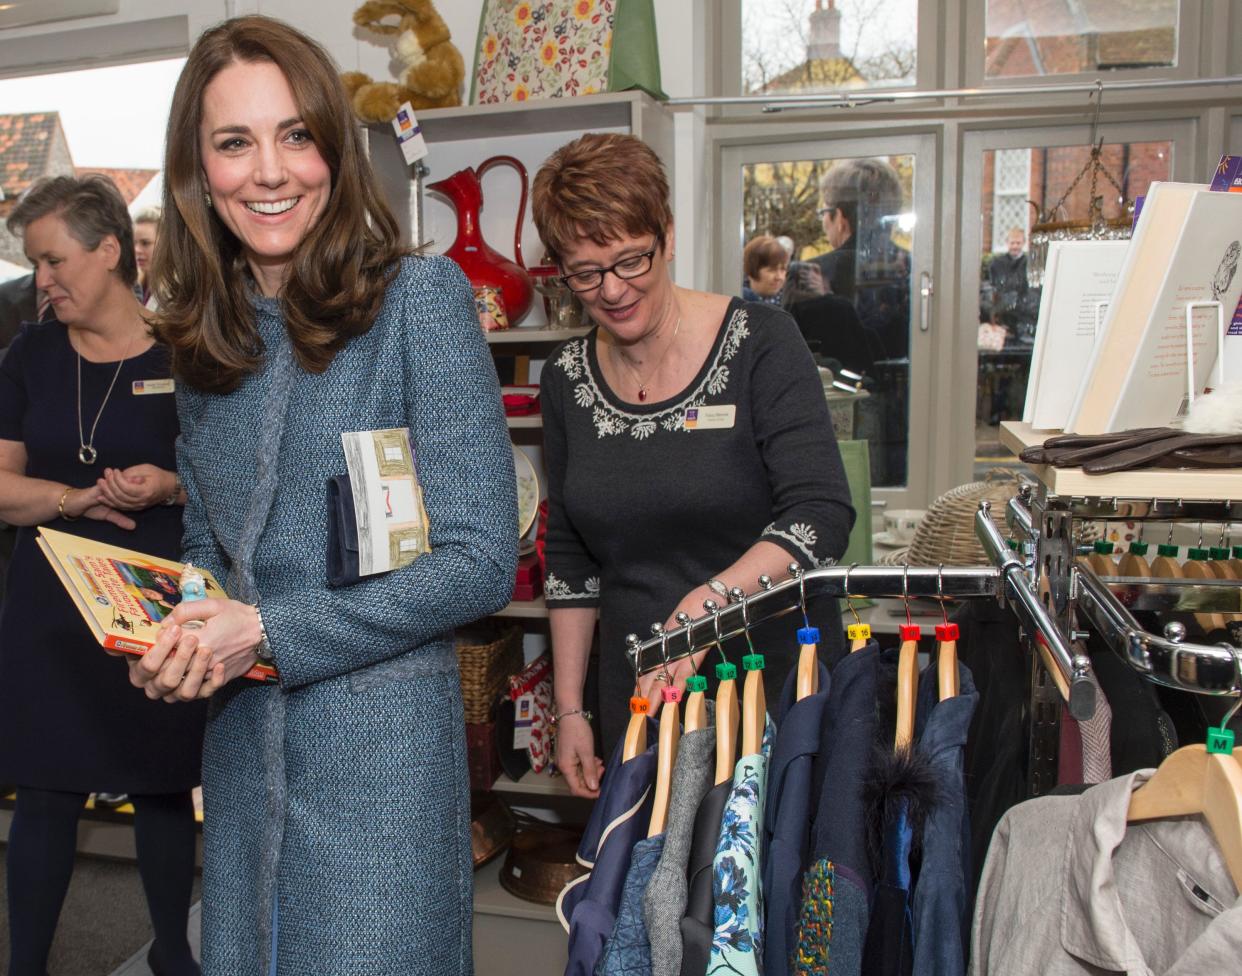 Britain's Catherine, Duchess of Cambridge, Royal Patron of East Anglias Childrens Hospices (EACH), is taken on a tour of the shop by Tracy Rennie (R), EACH Director of Care, on a visit to open a new EACH charity shop in Holt, eastern England on March 18, 2016.
EACH supports families and cares for children and young people with life-threatening conditions across Cambridgeshire, Essex, Norfolk and Suffolk. / AFP / POOL / Arthur Edwards        (Photo credit should read ARTHUR EDWARDS/AFP via Getty Images)